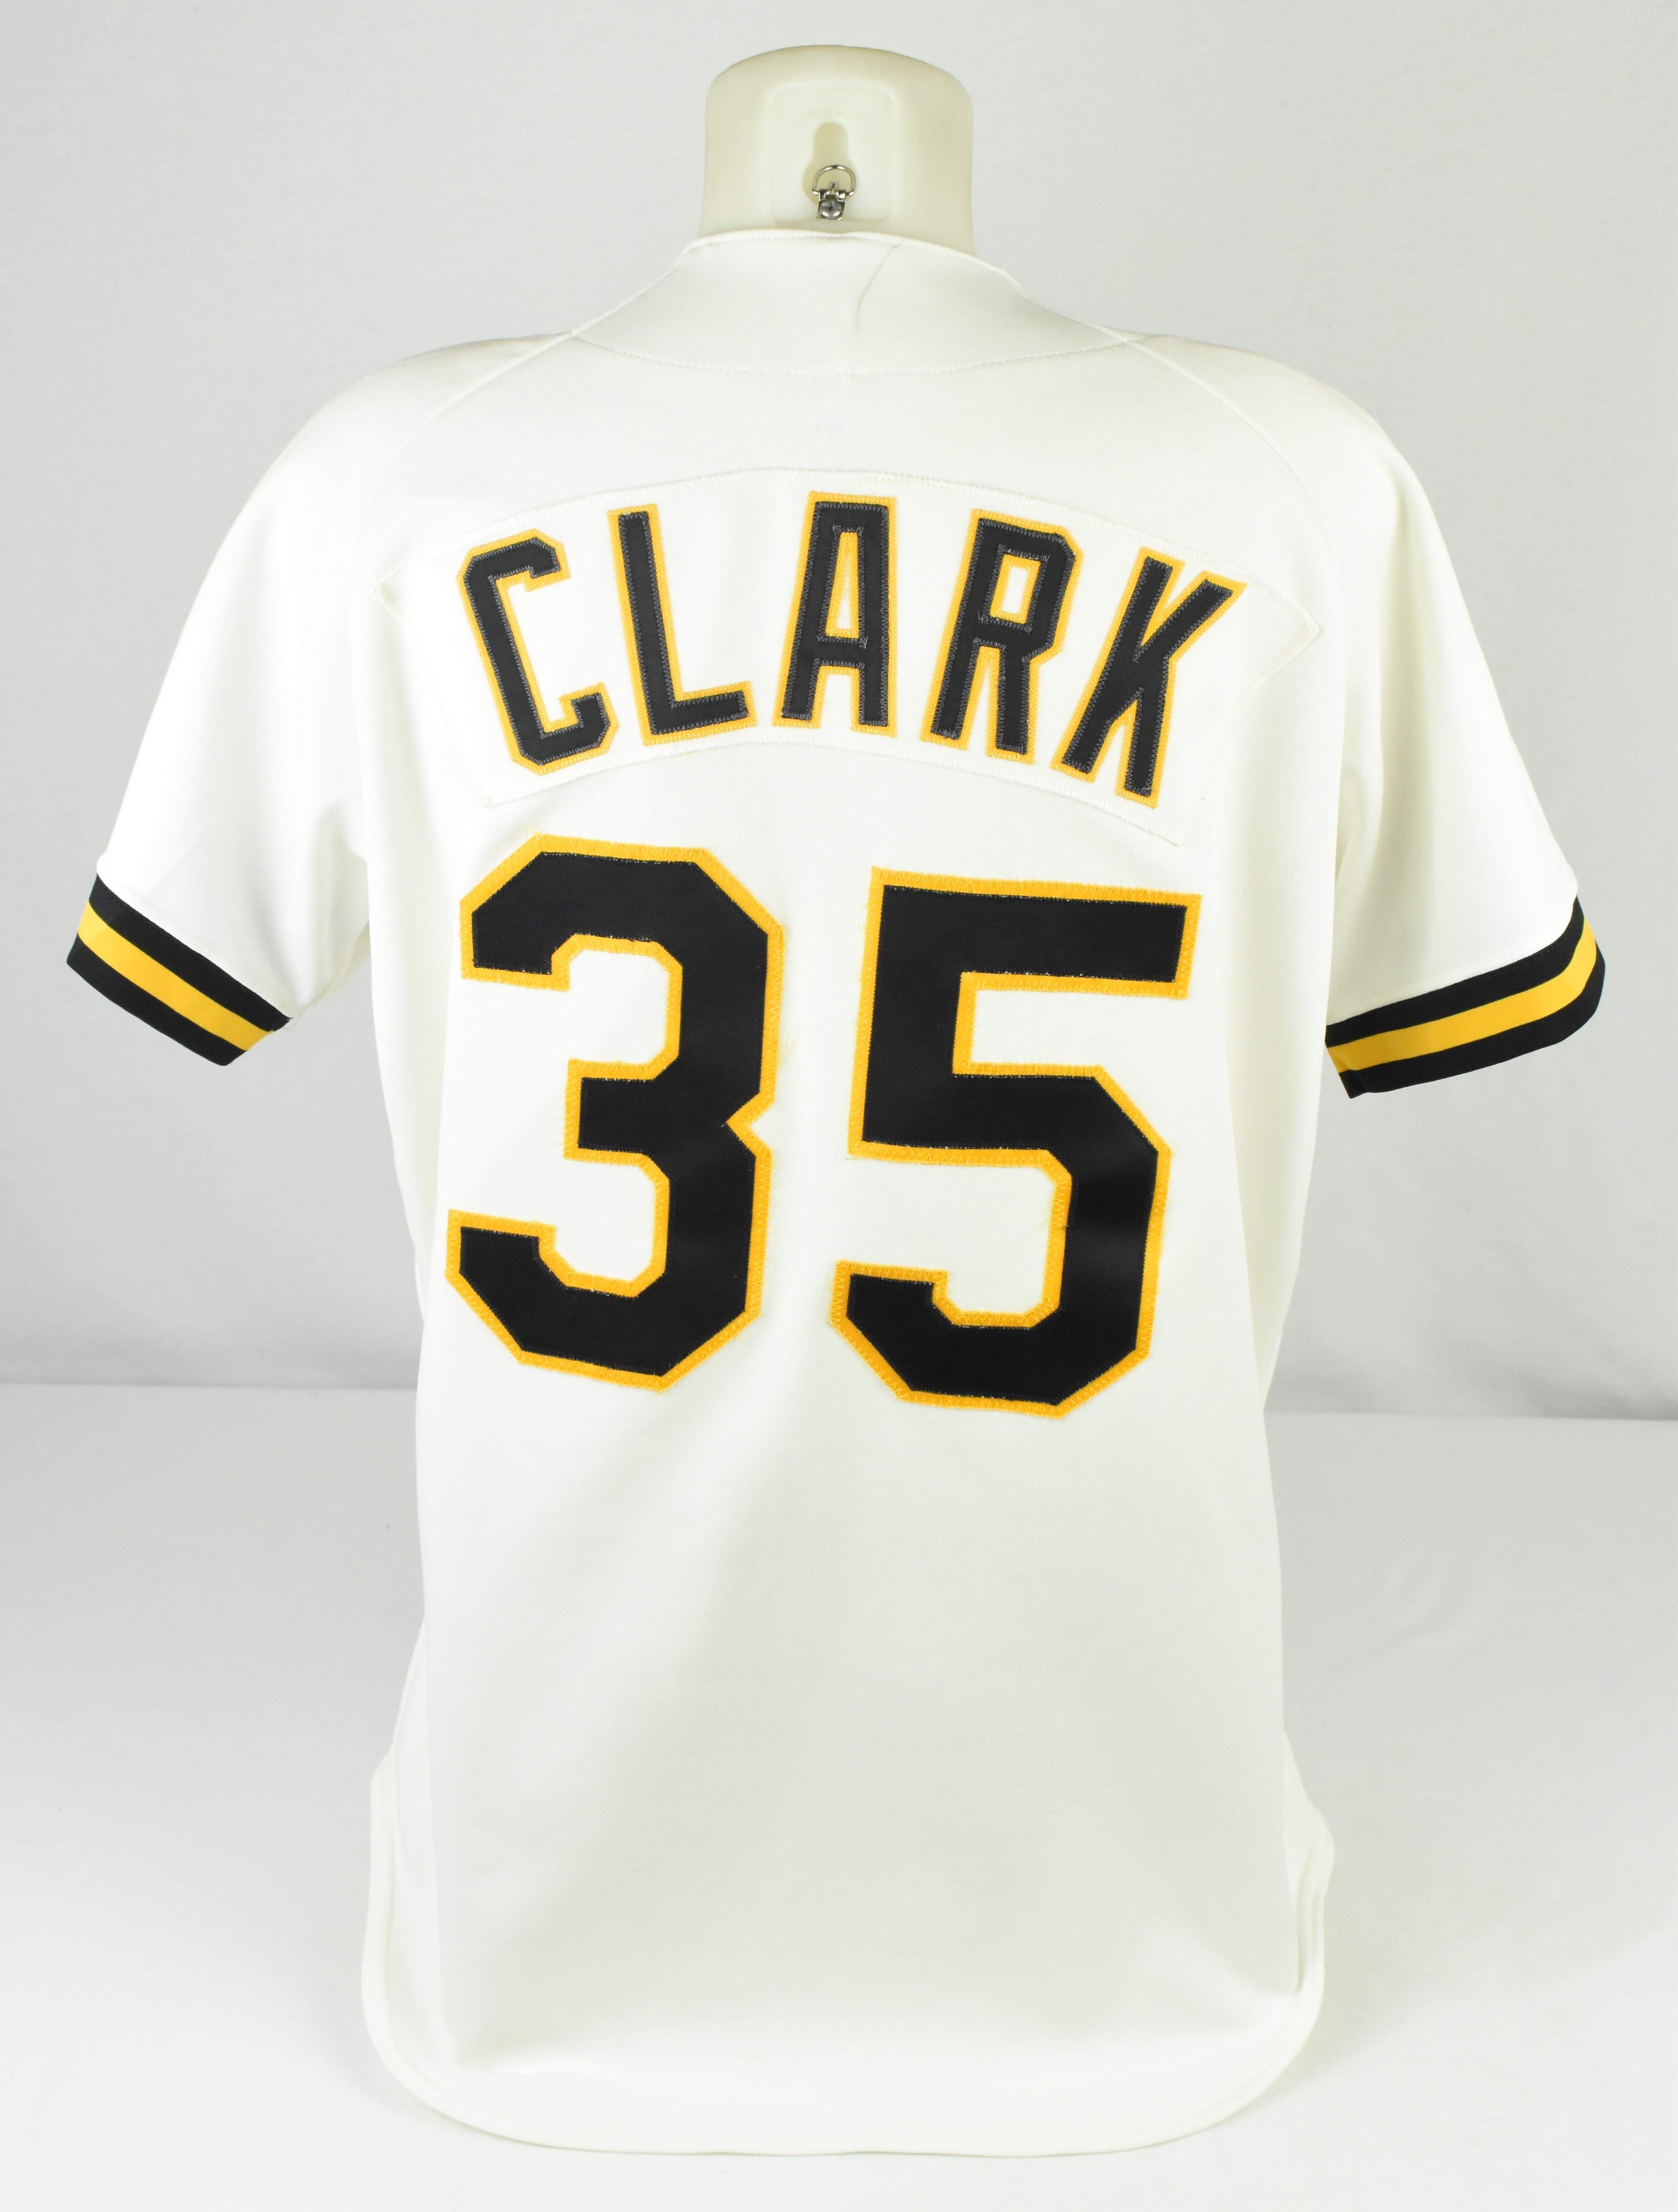 pirates game used jersey